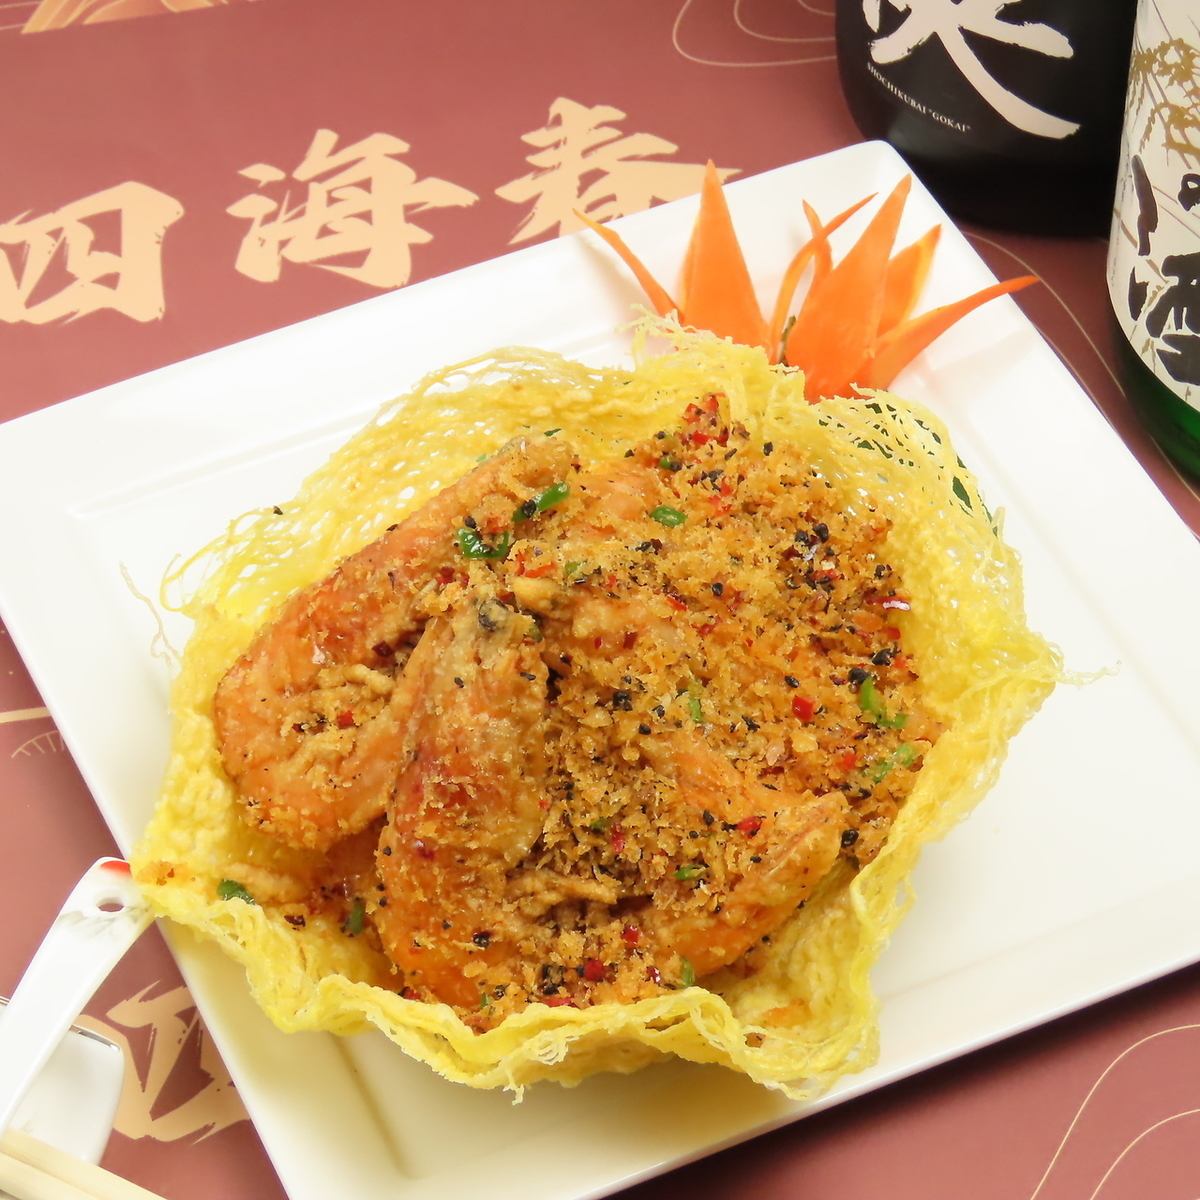 Among the creative dishes from southern China, we are proud of our seafood dishes using shrimp and crab!